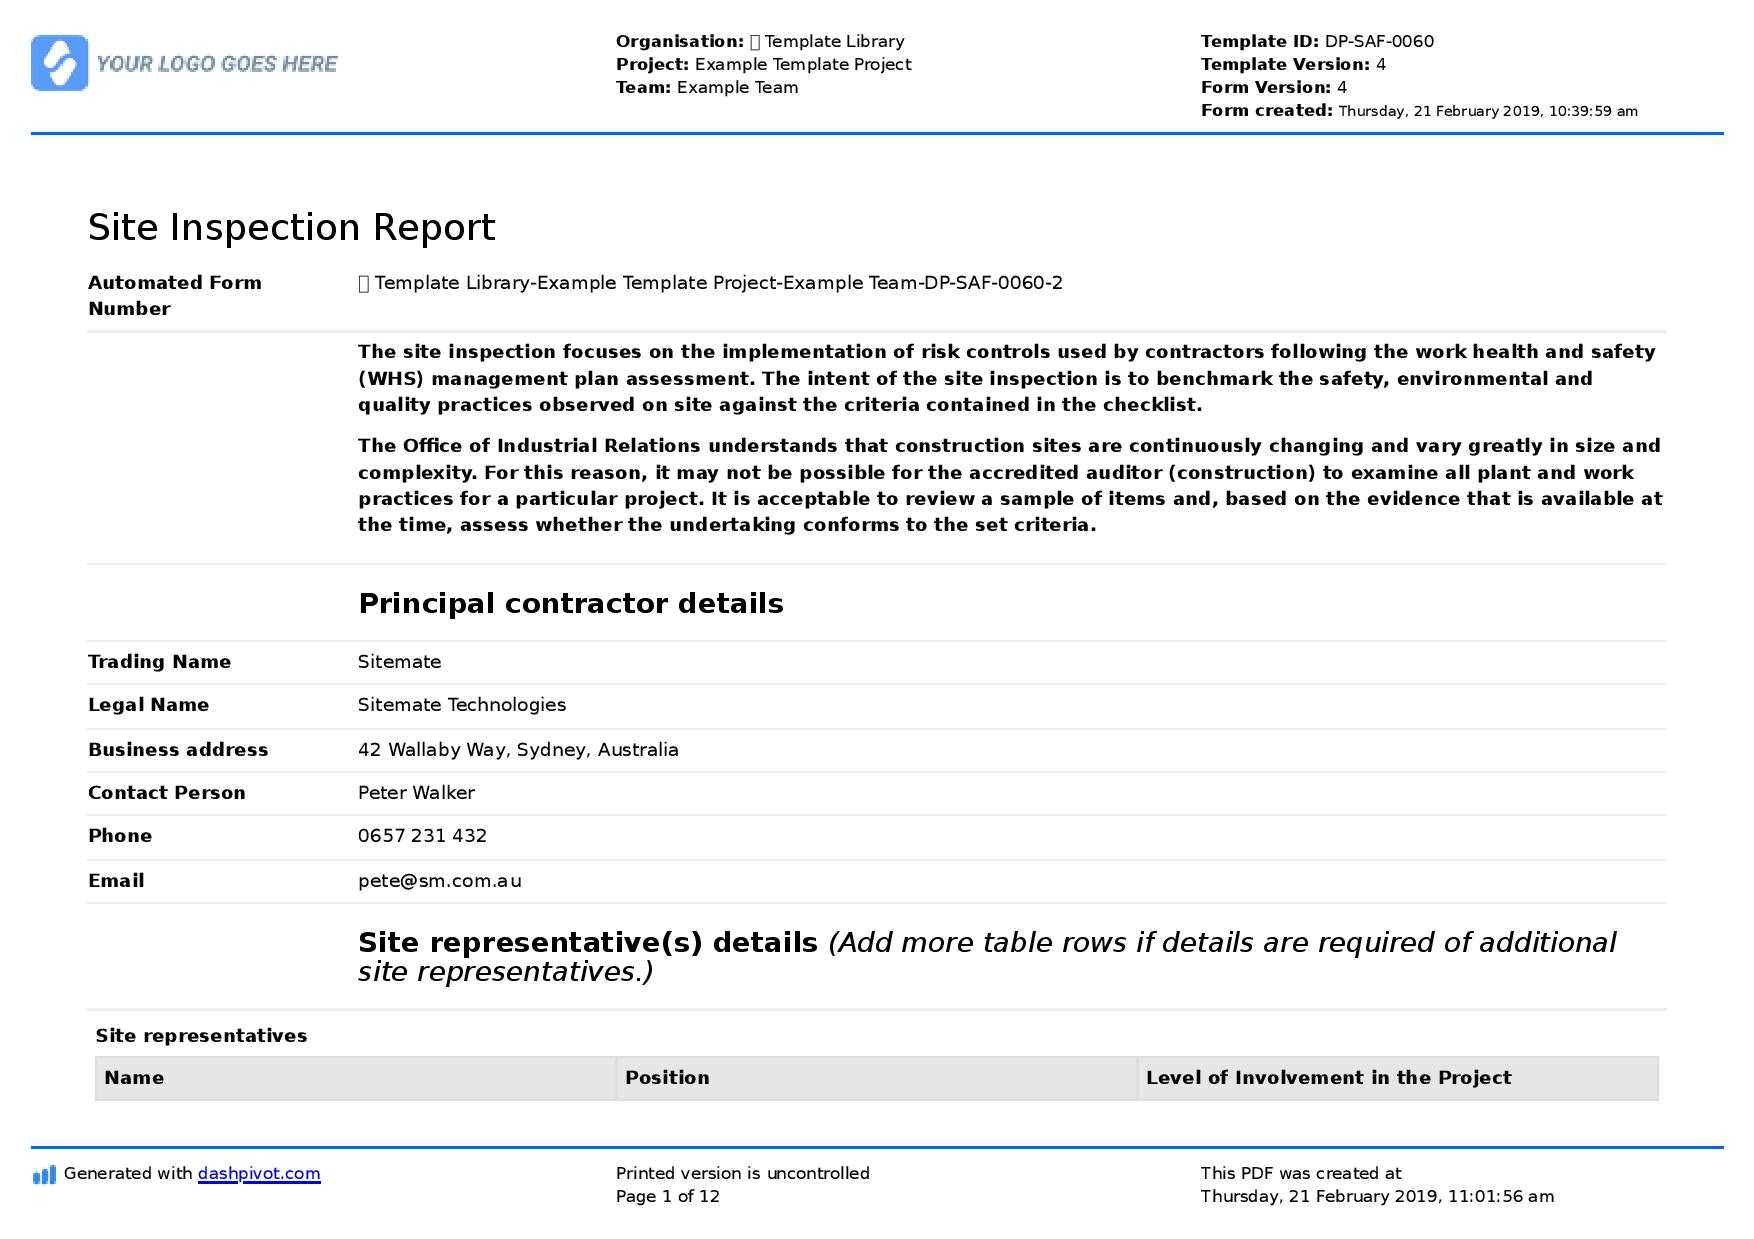 Site Inspection Report: Free Template, Sample And A Proven Throughout Report Requirements Template